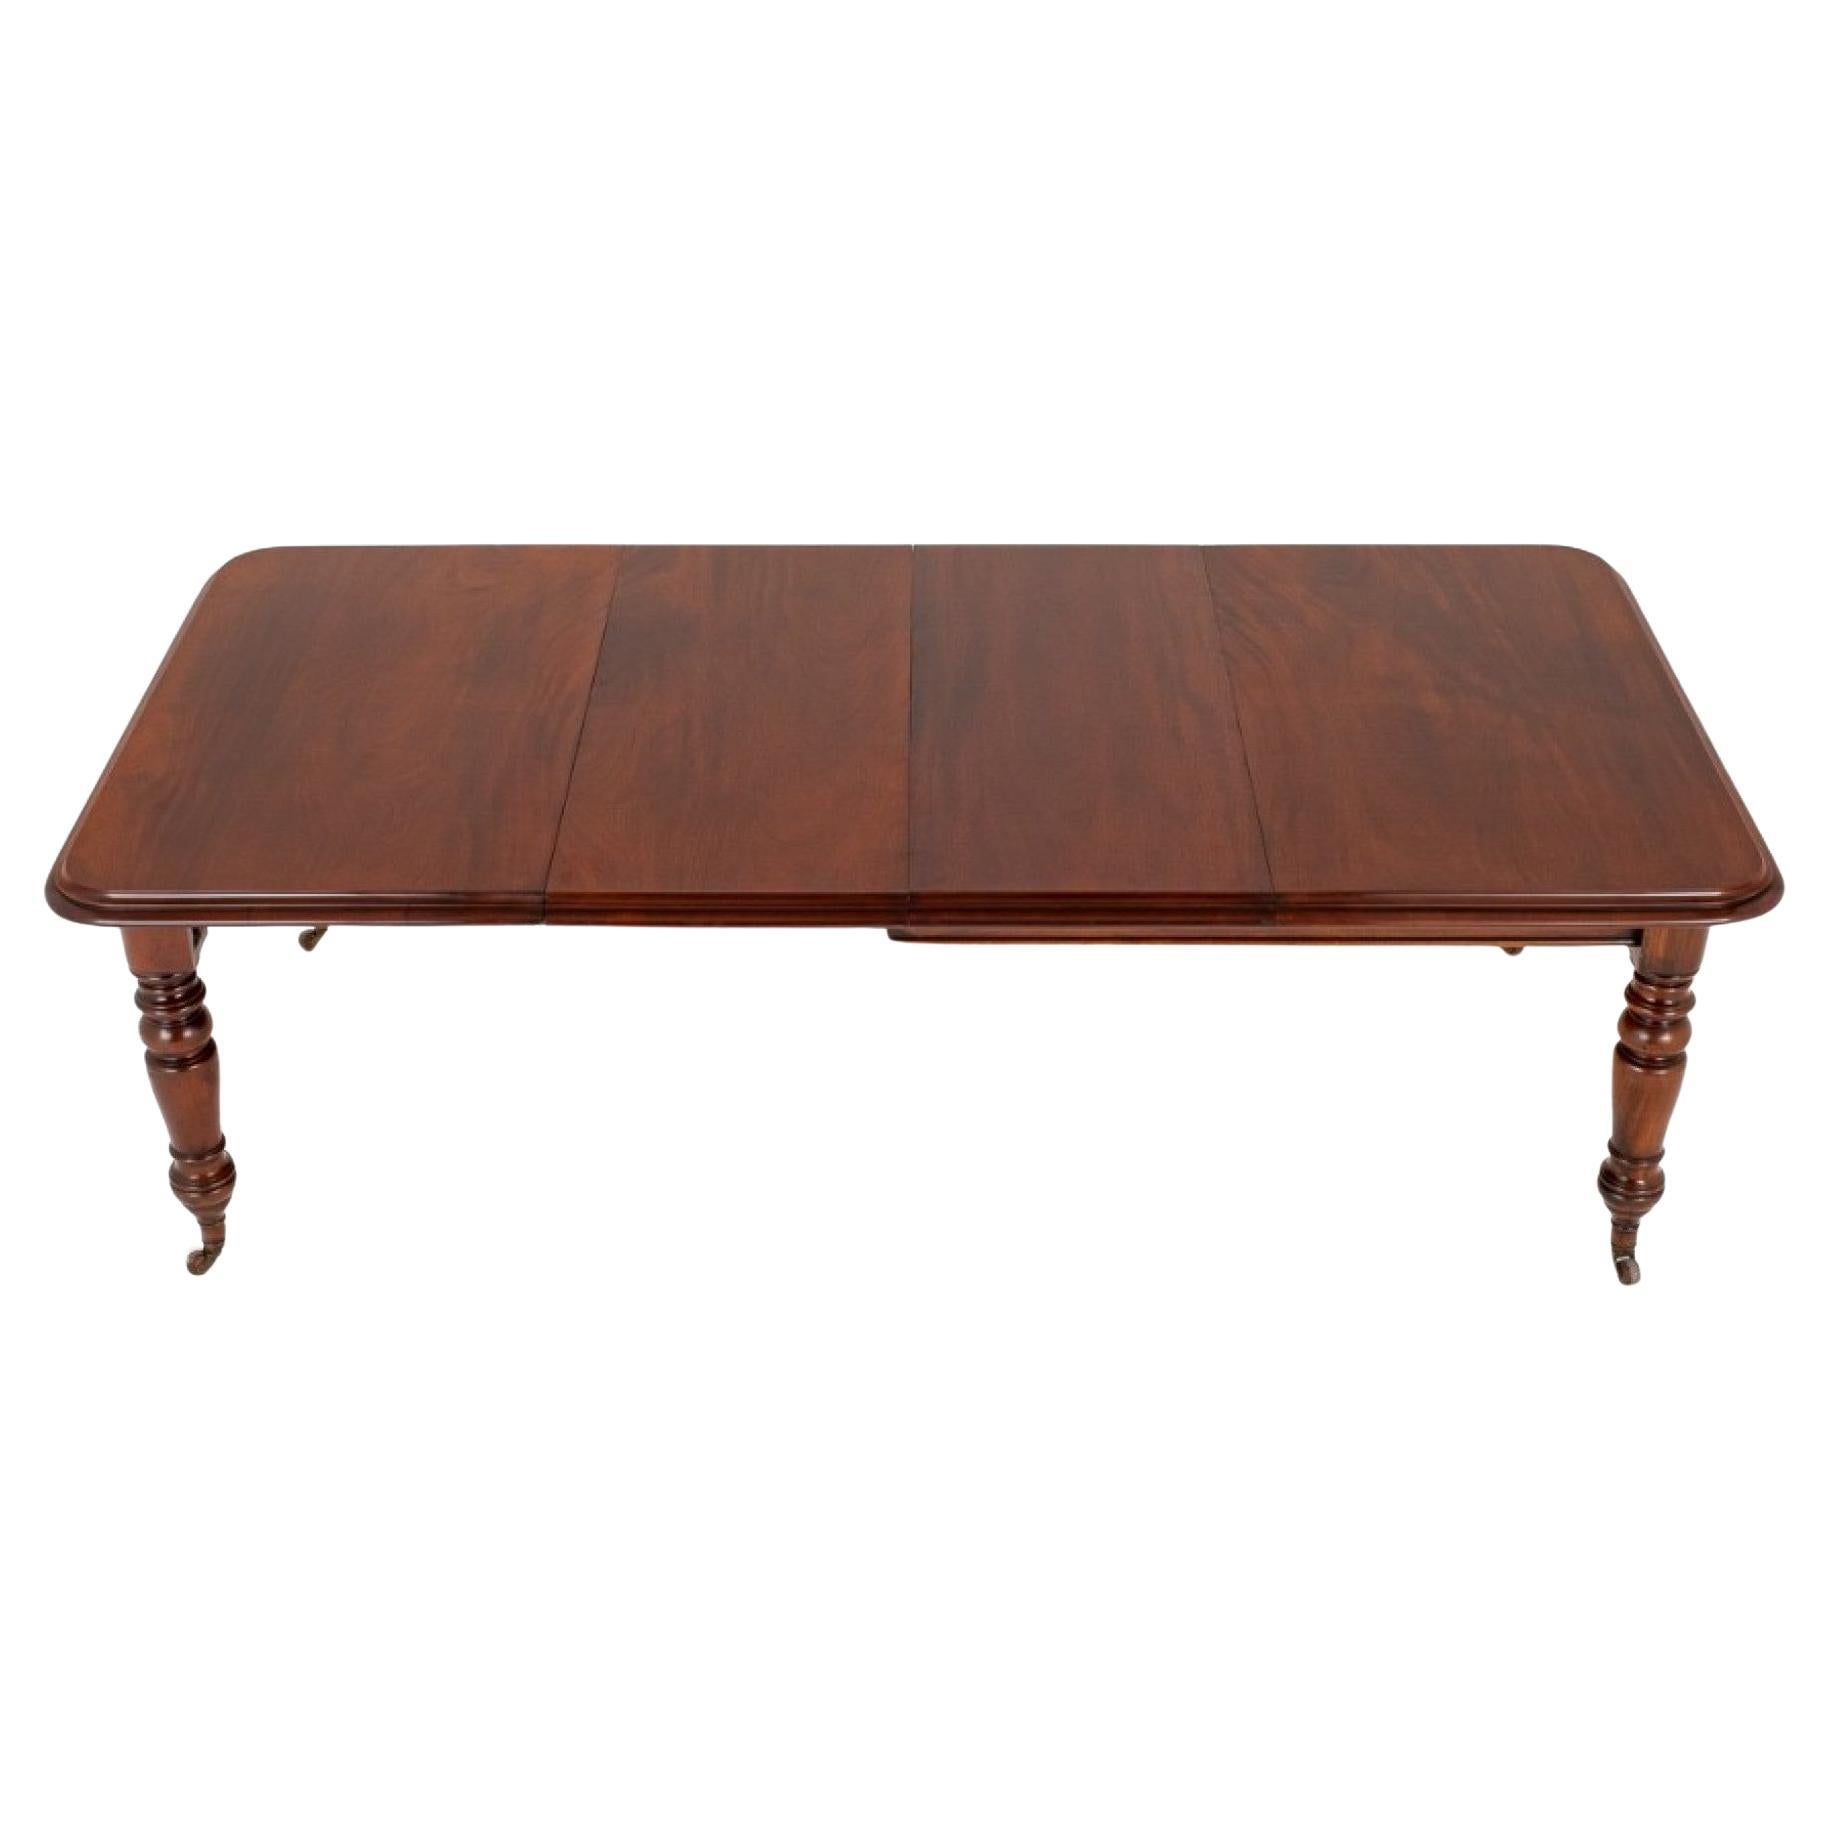 Antique Dining Table Extending Victorian Mahogany 1870